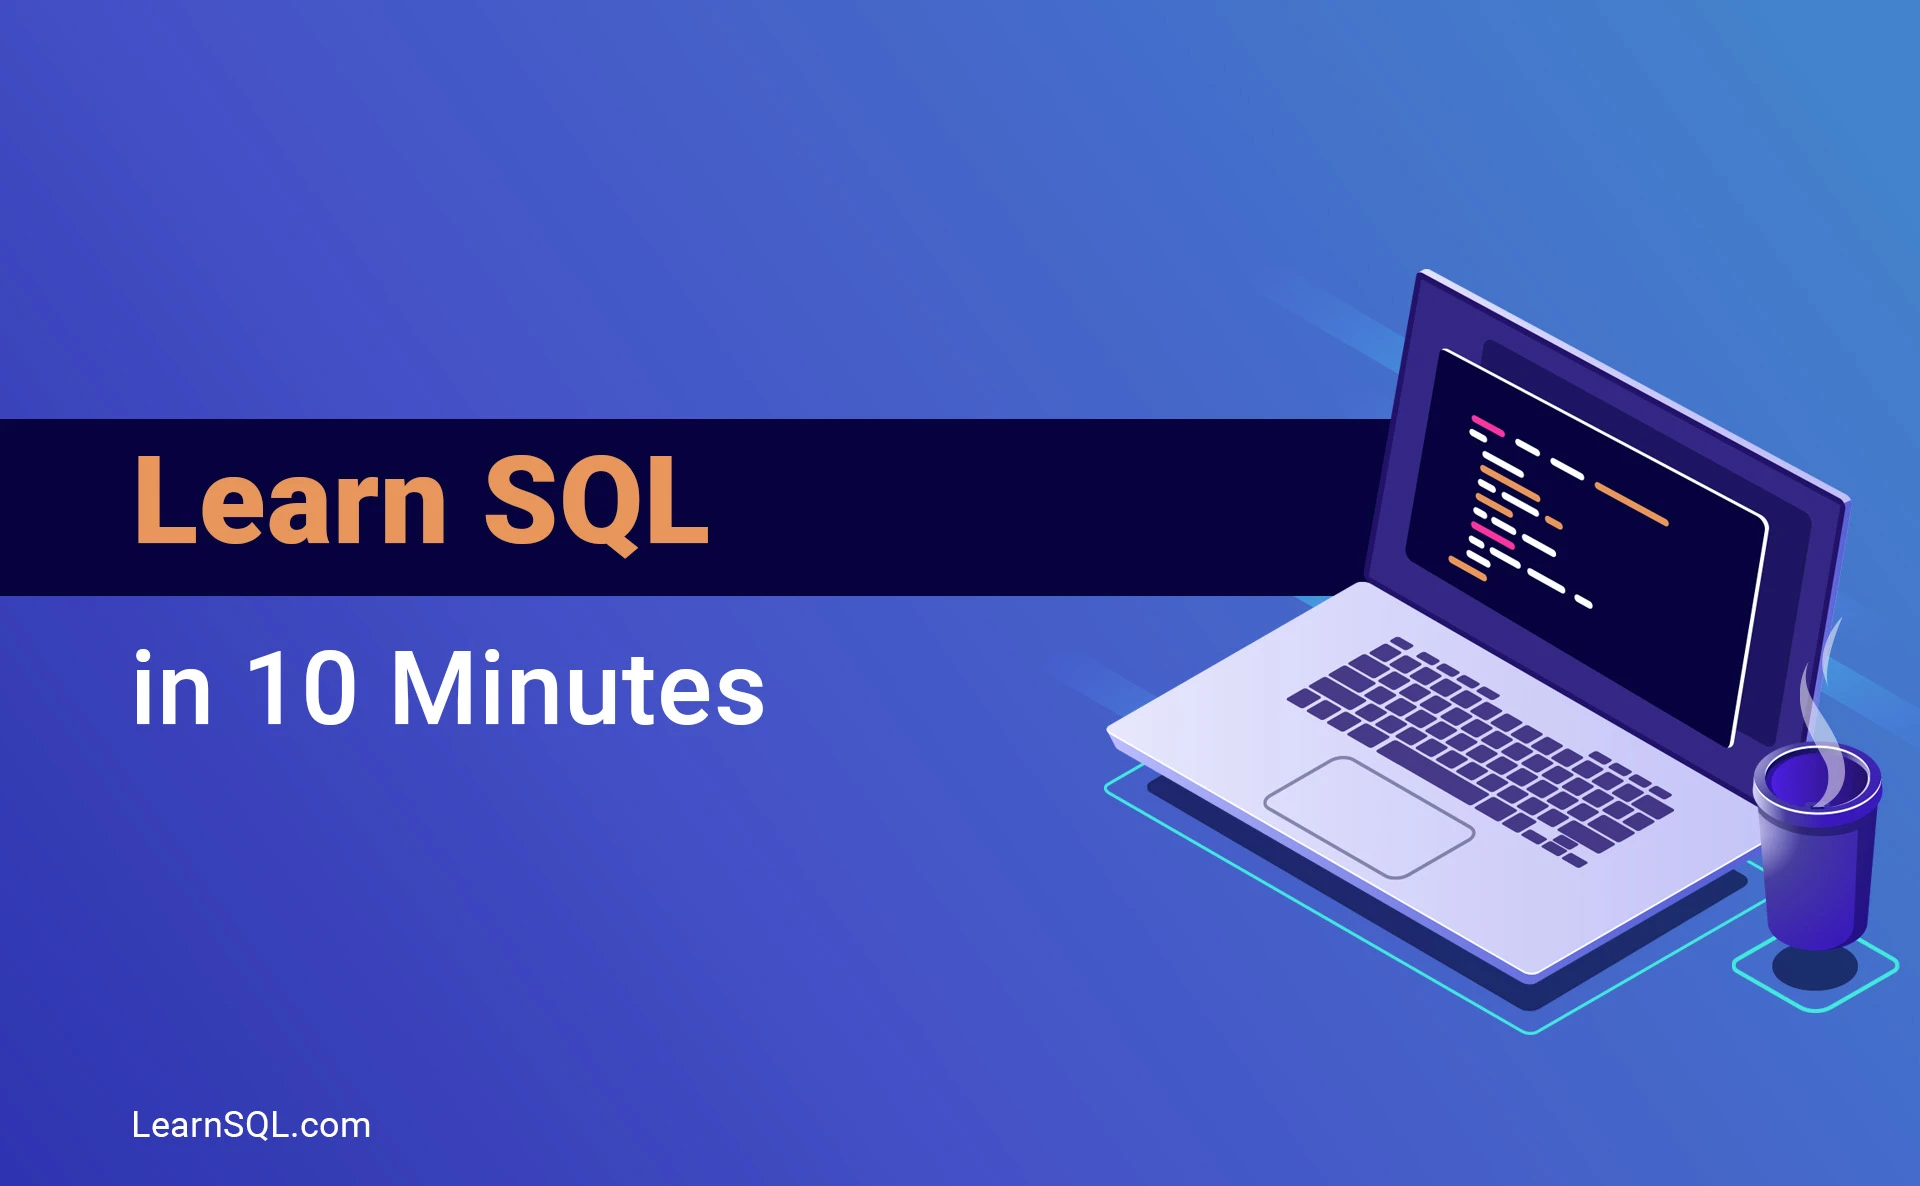 Learn SQL in 10 Minutes